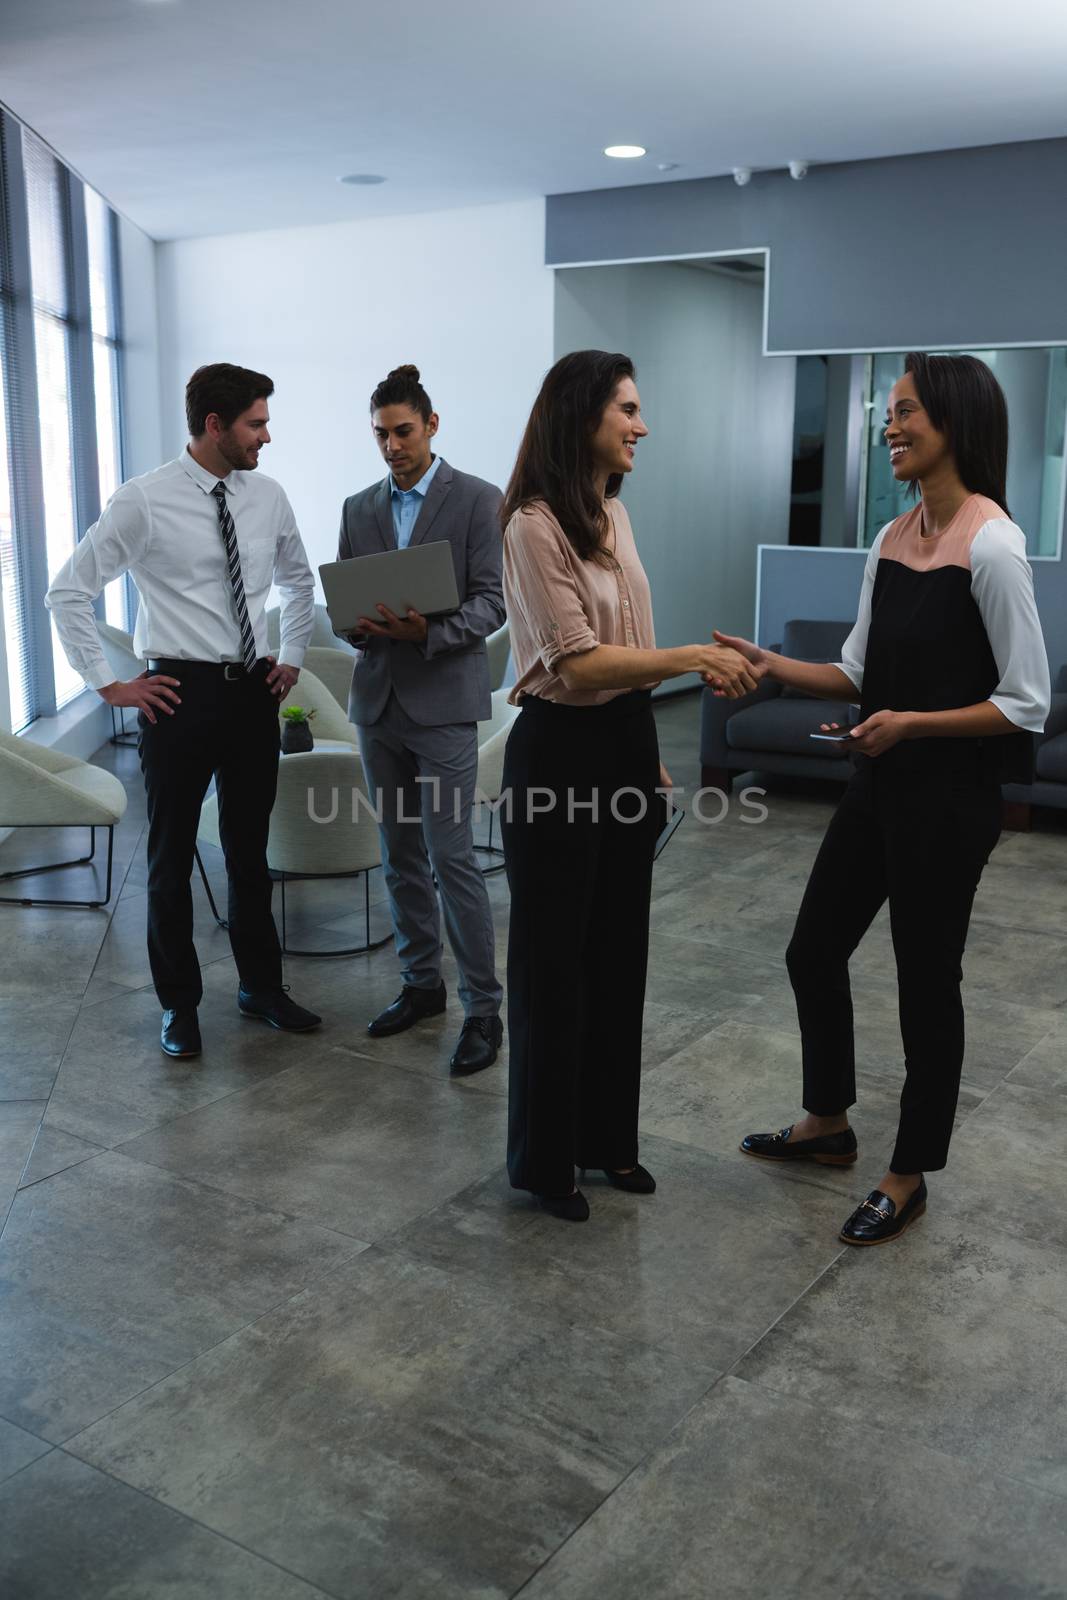 Business colleagues interacting with each other by Wavebreakmedia